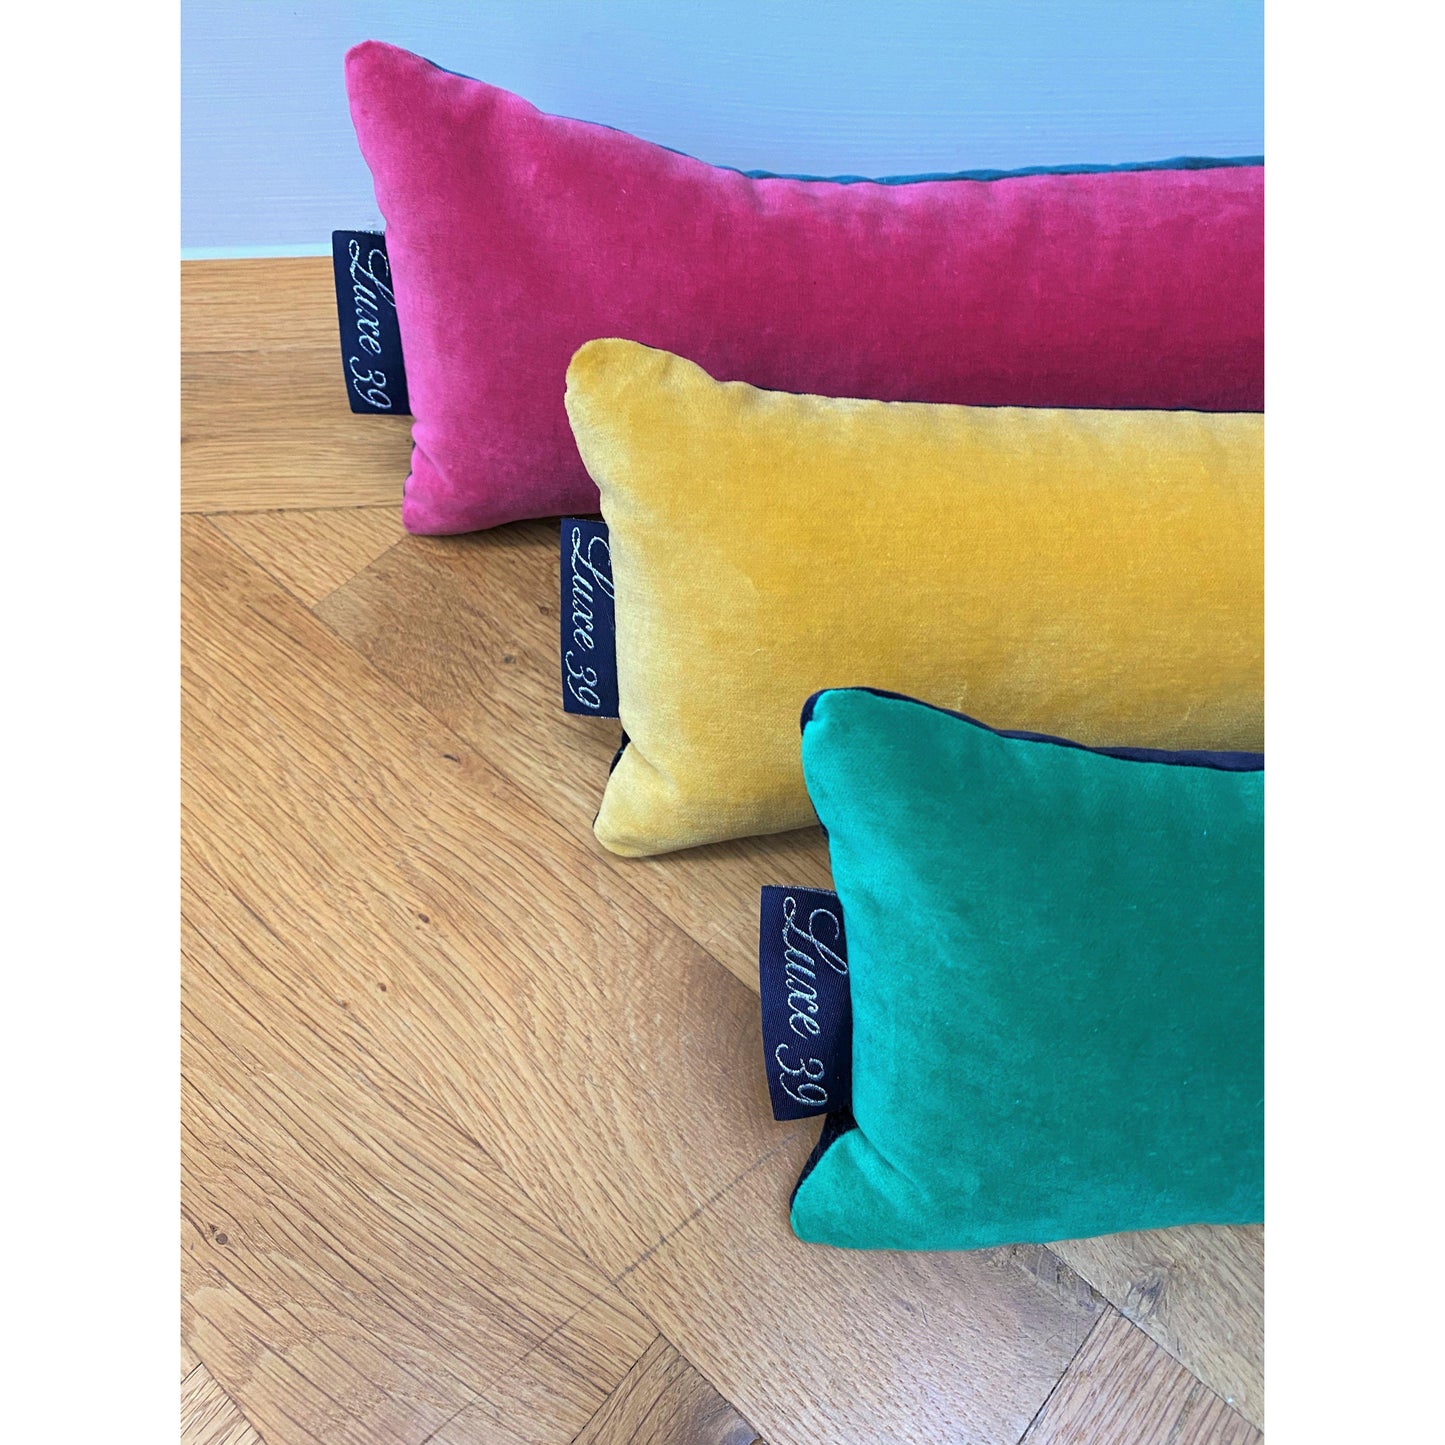 velvet draft excluders with Luxe 39 labels